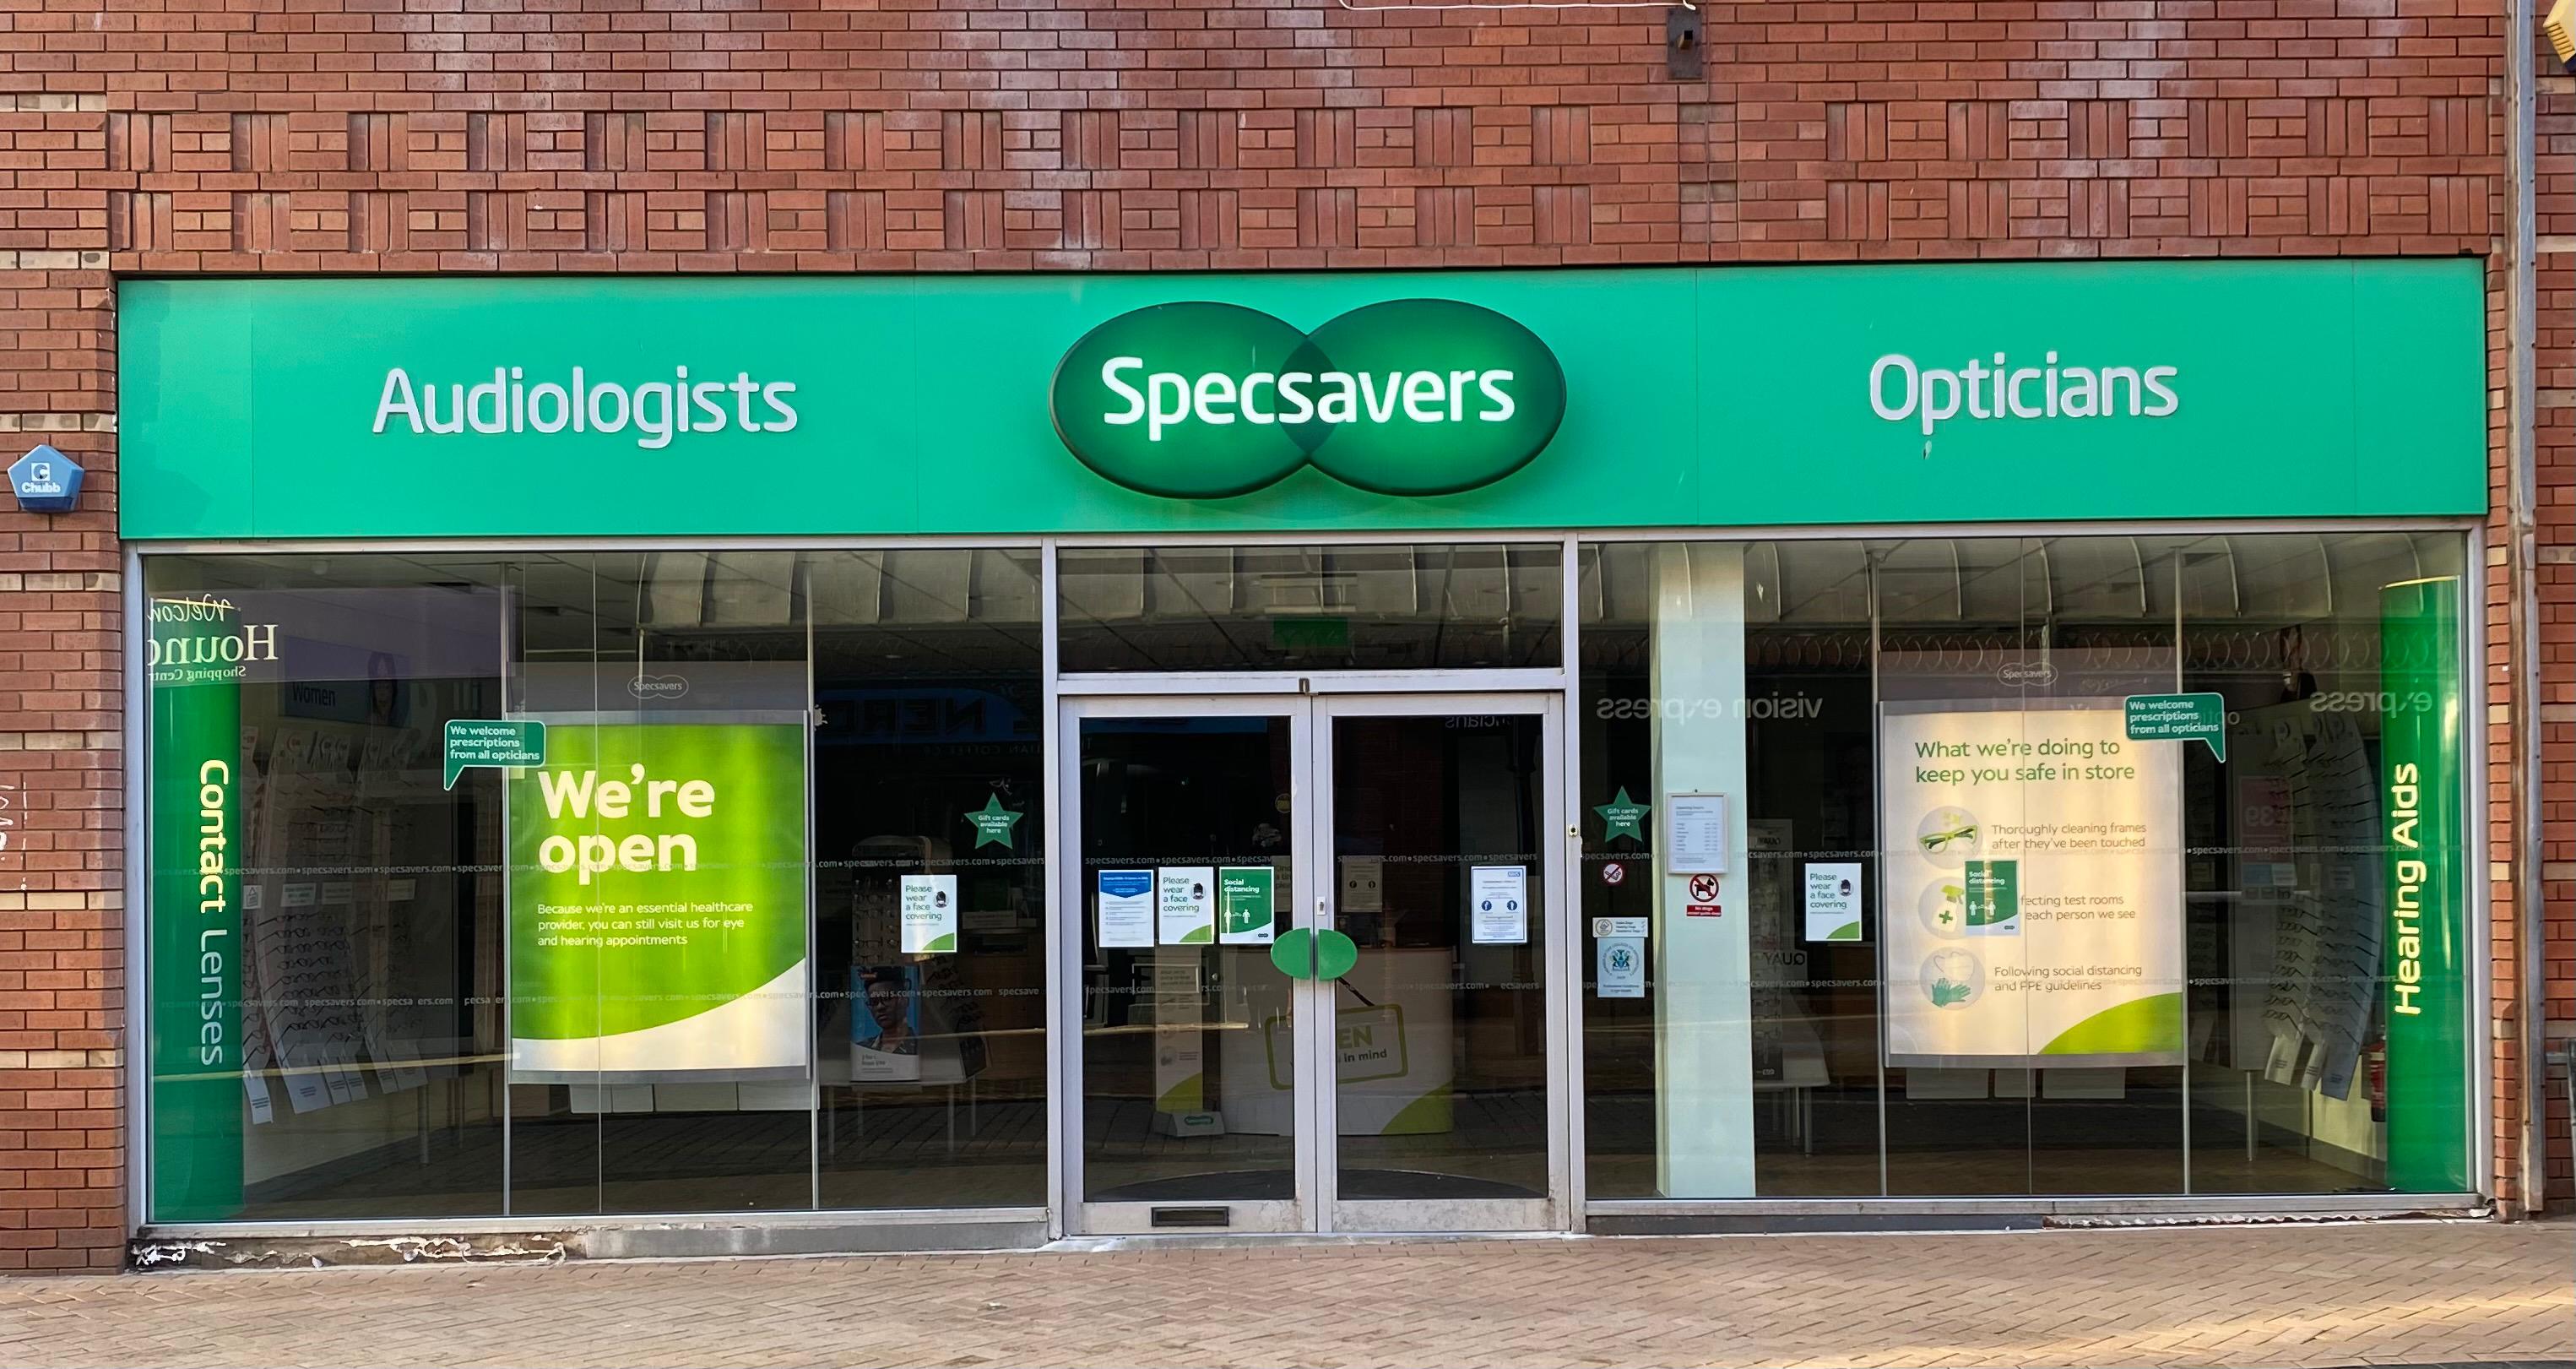 Images Specsavers Opticians and Audiologists - Blackpool